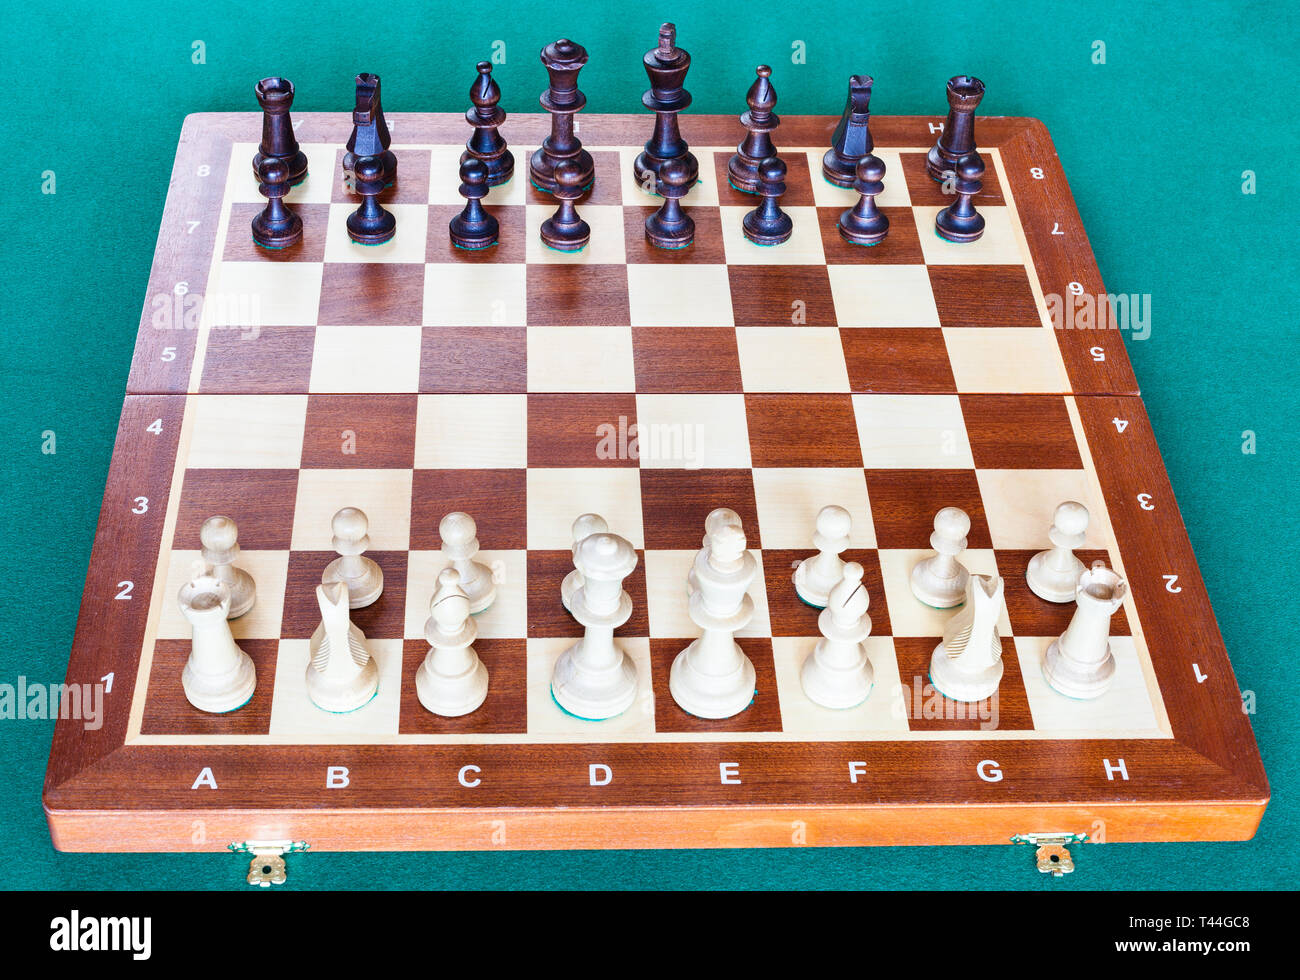 Wooden Chess Board Pieces Arranged Starting Stock Photo 684556210